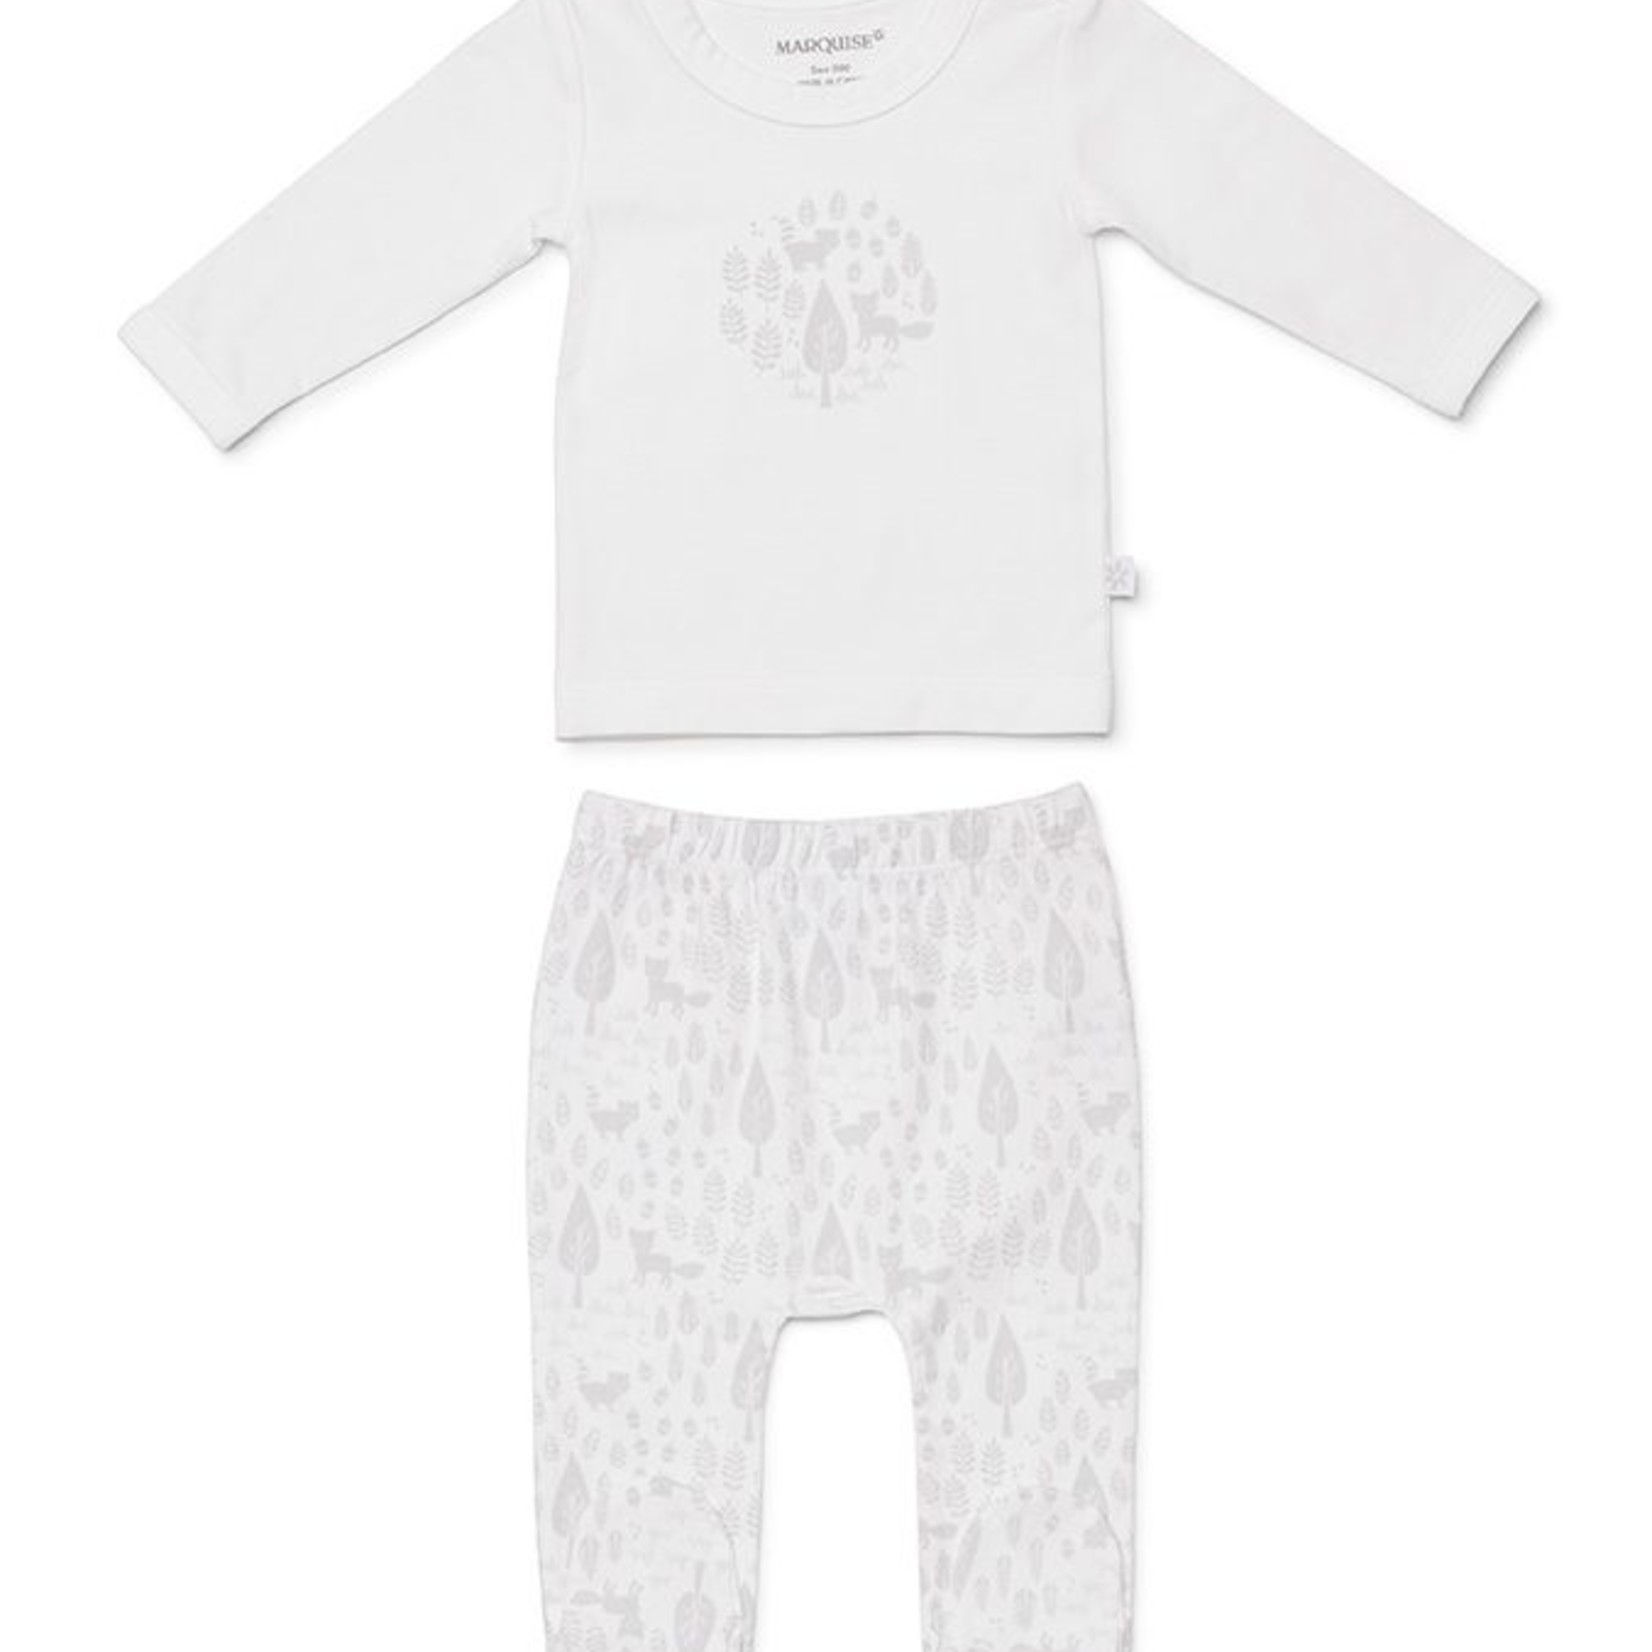 Marquise Newborn Essentials Top and footed legging set